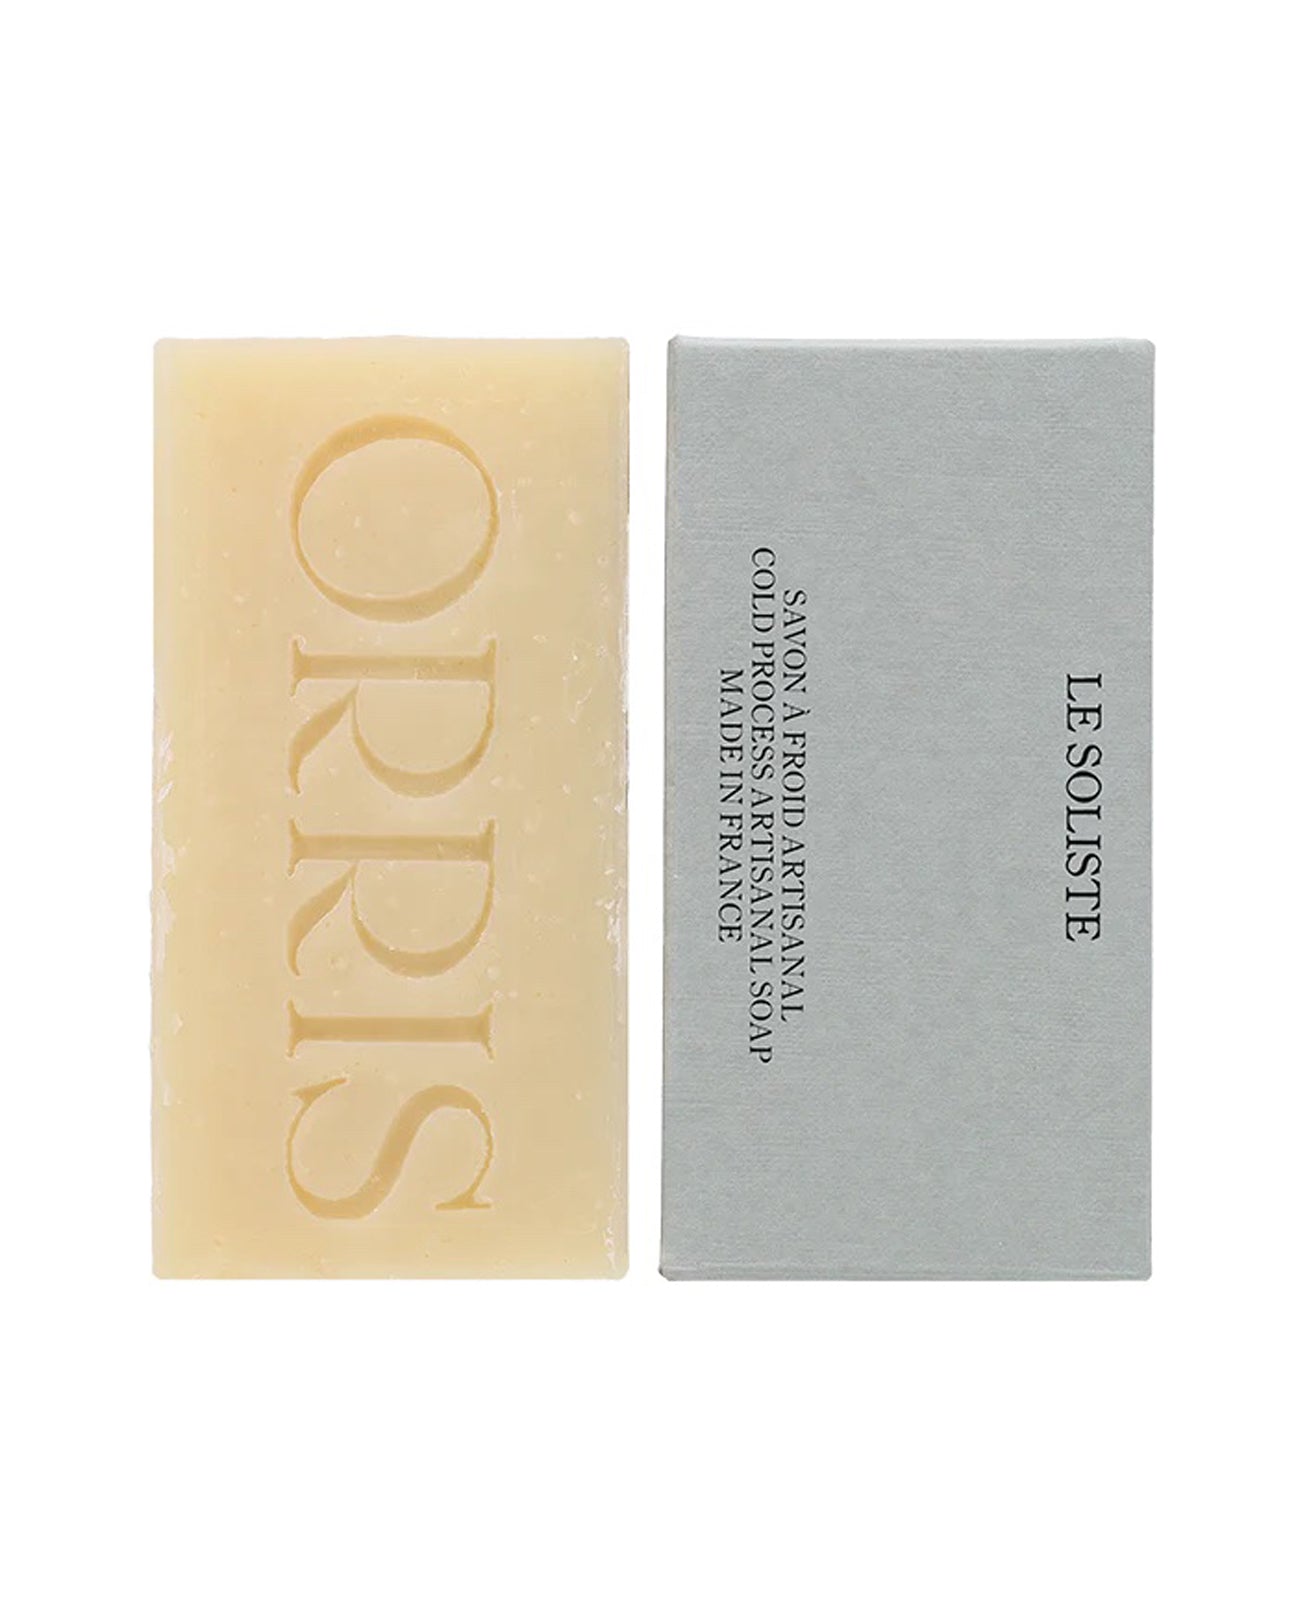 ORRIS All Natural Cold Process Soap in Le Soliste available at Lahn.shop